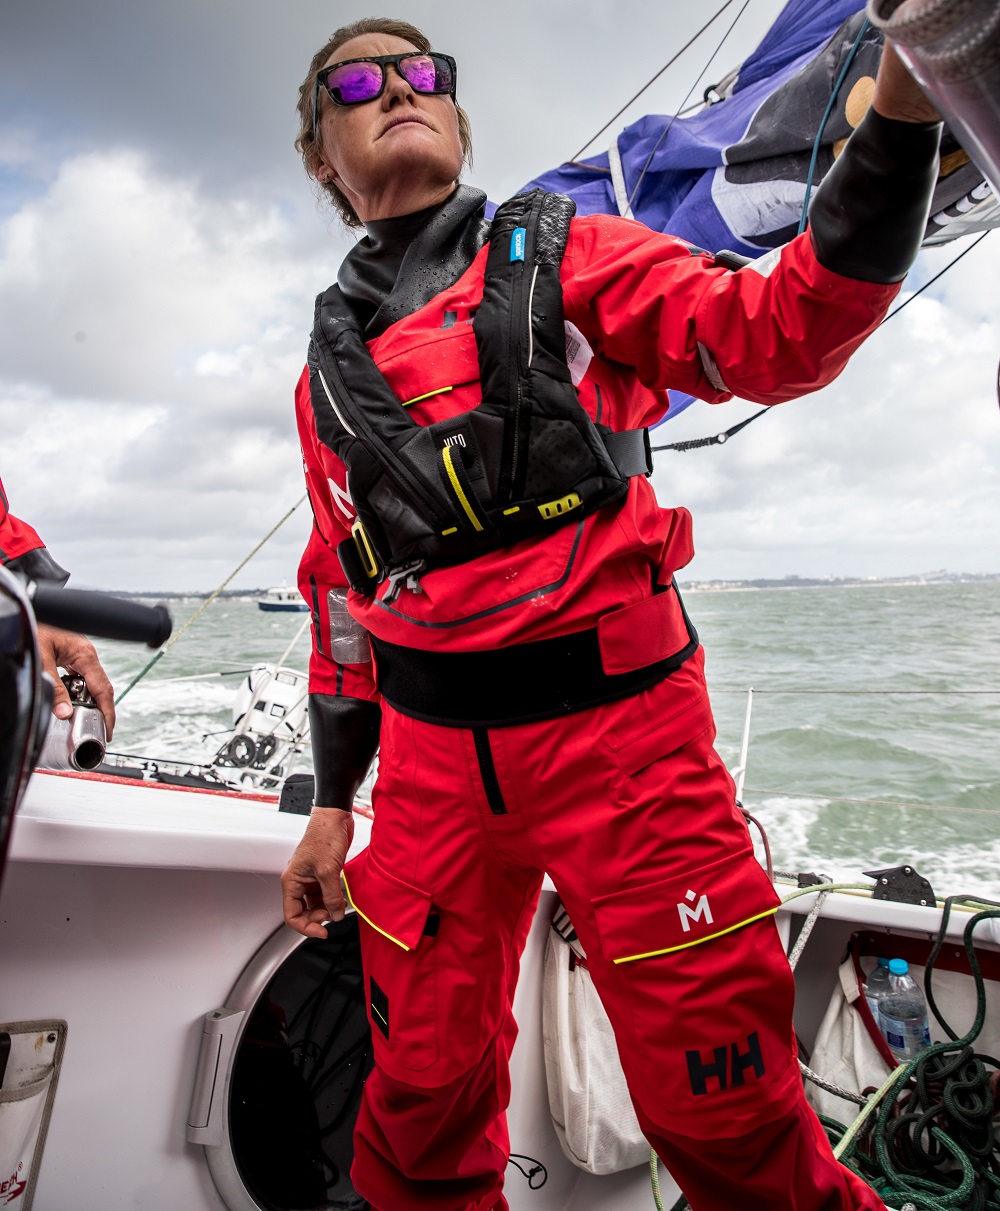 “The conditions were far from ideal, but once I was committed to changing the rudder myself, there was nothing that was going to get in my way.”